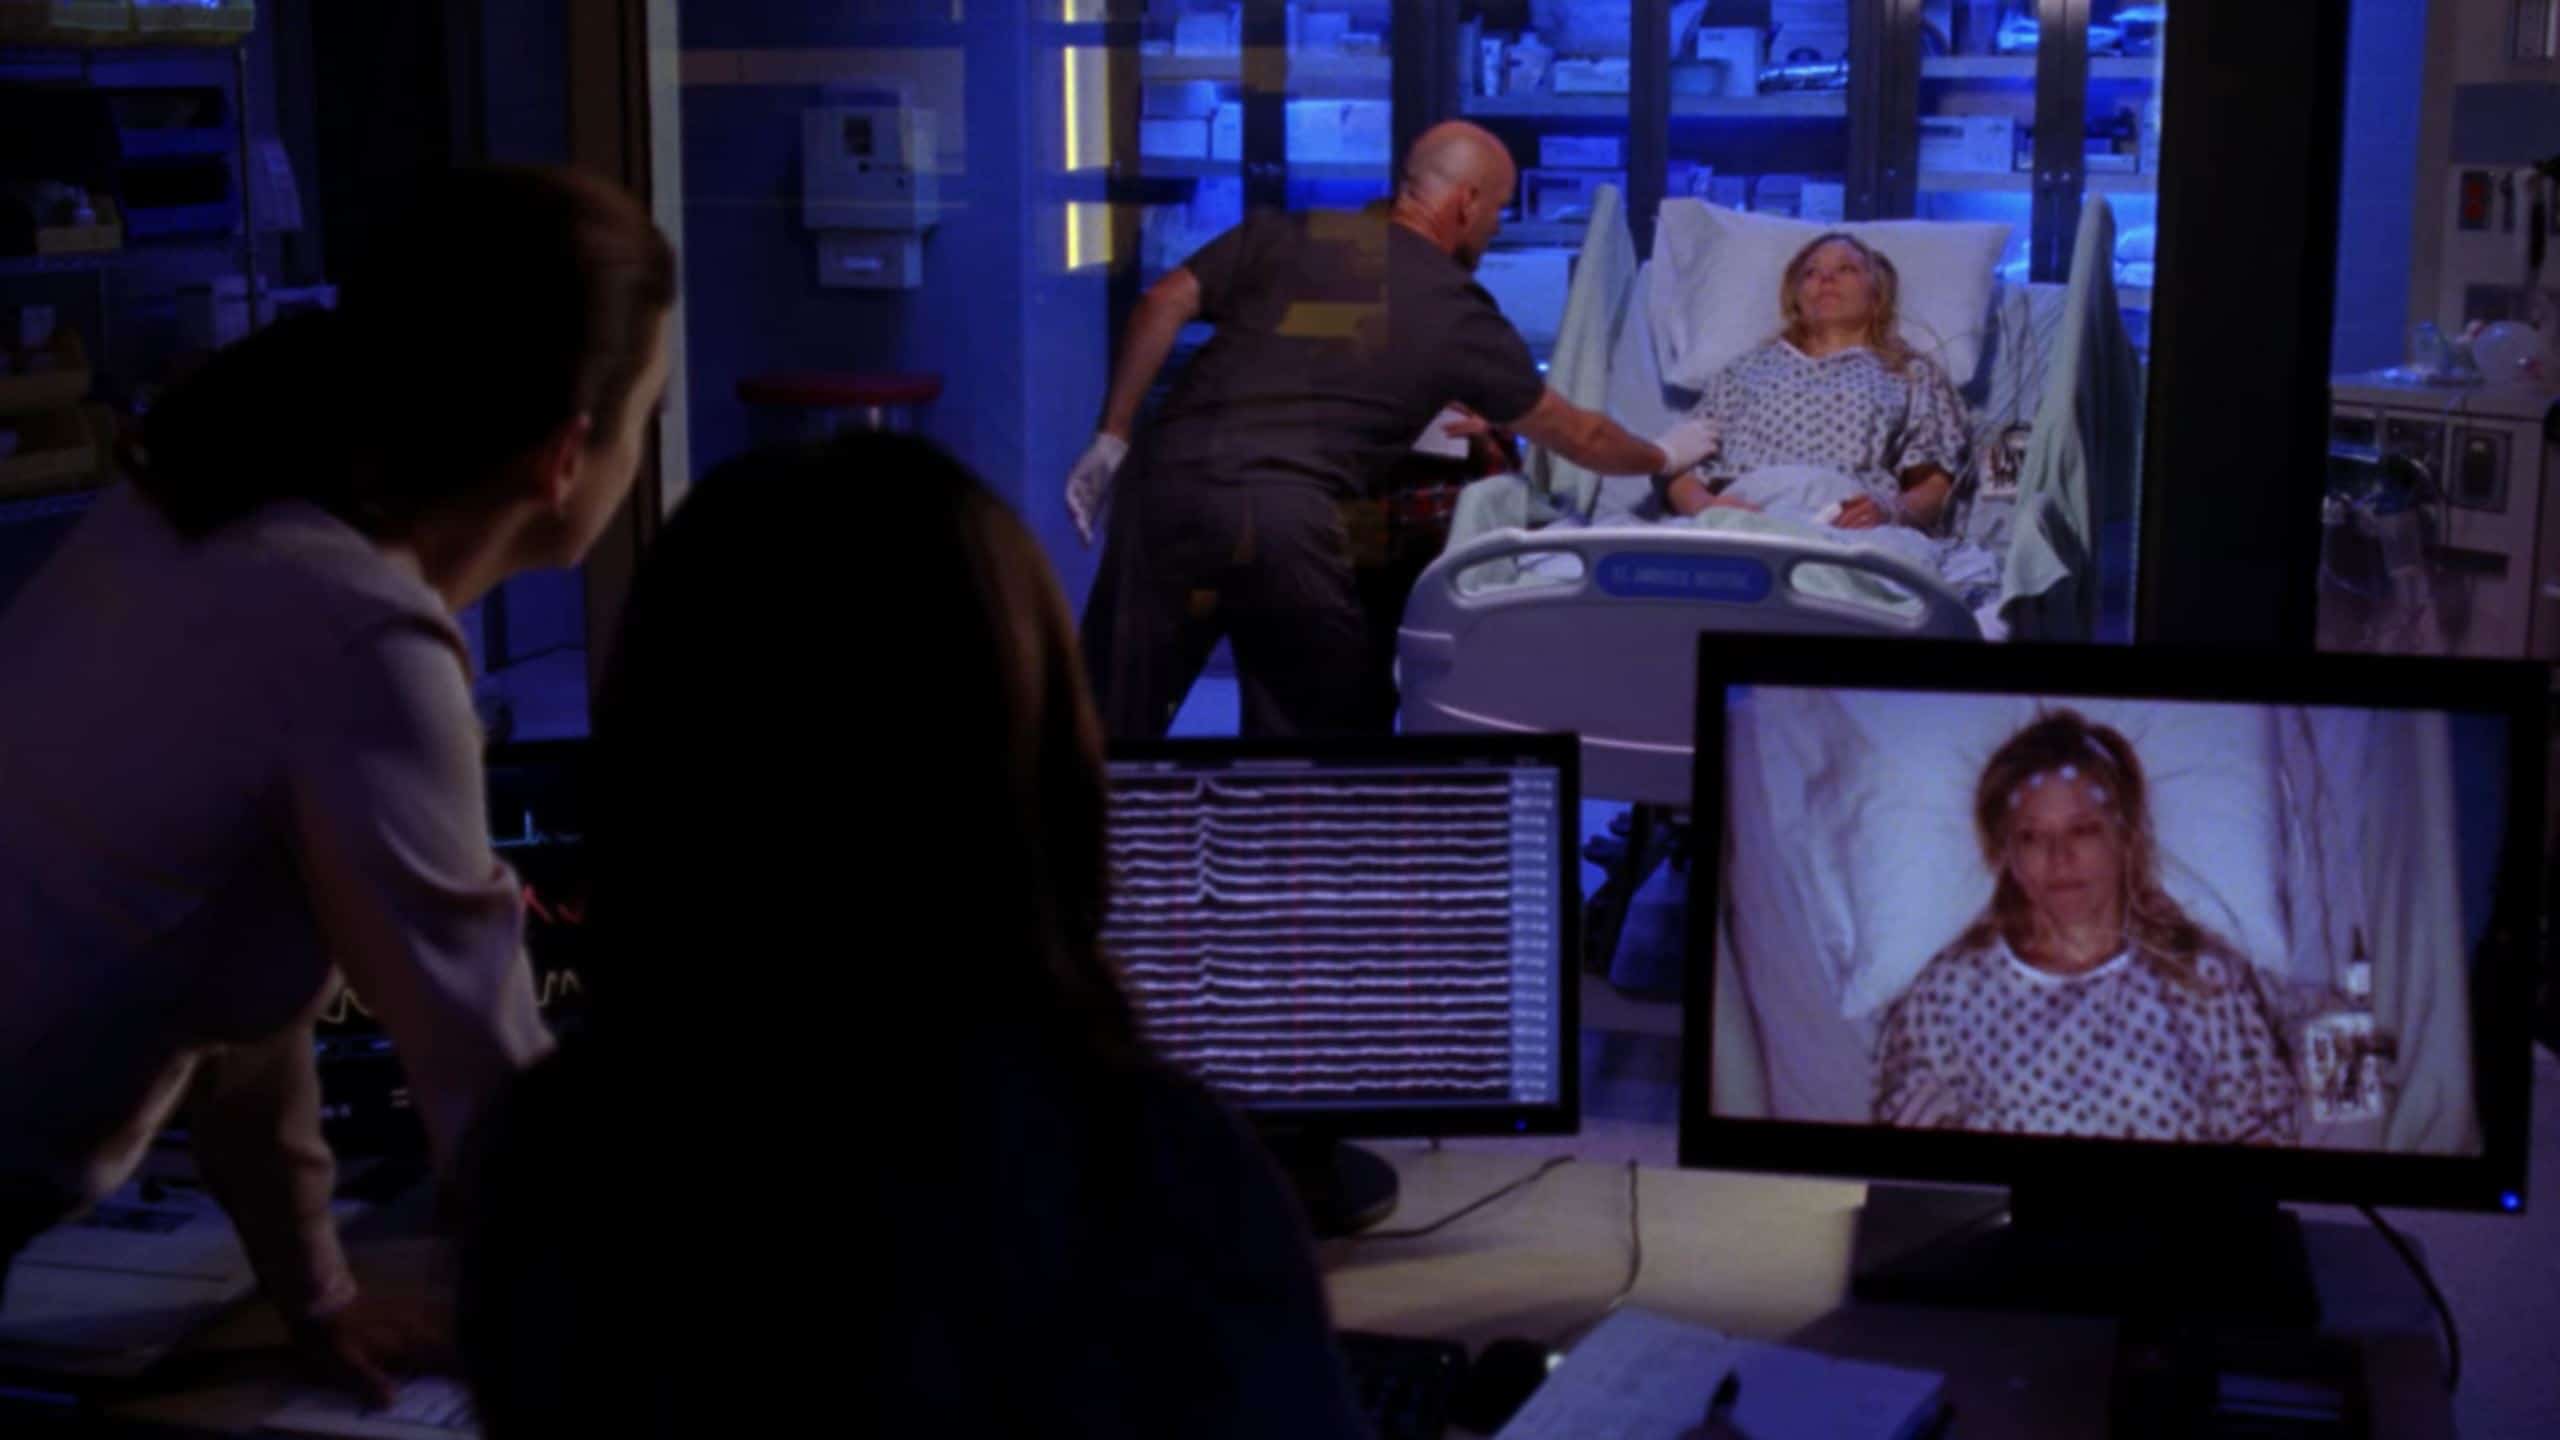 epilepsy monitoring unit in a TV show